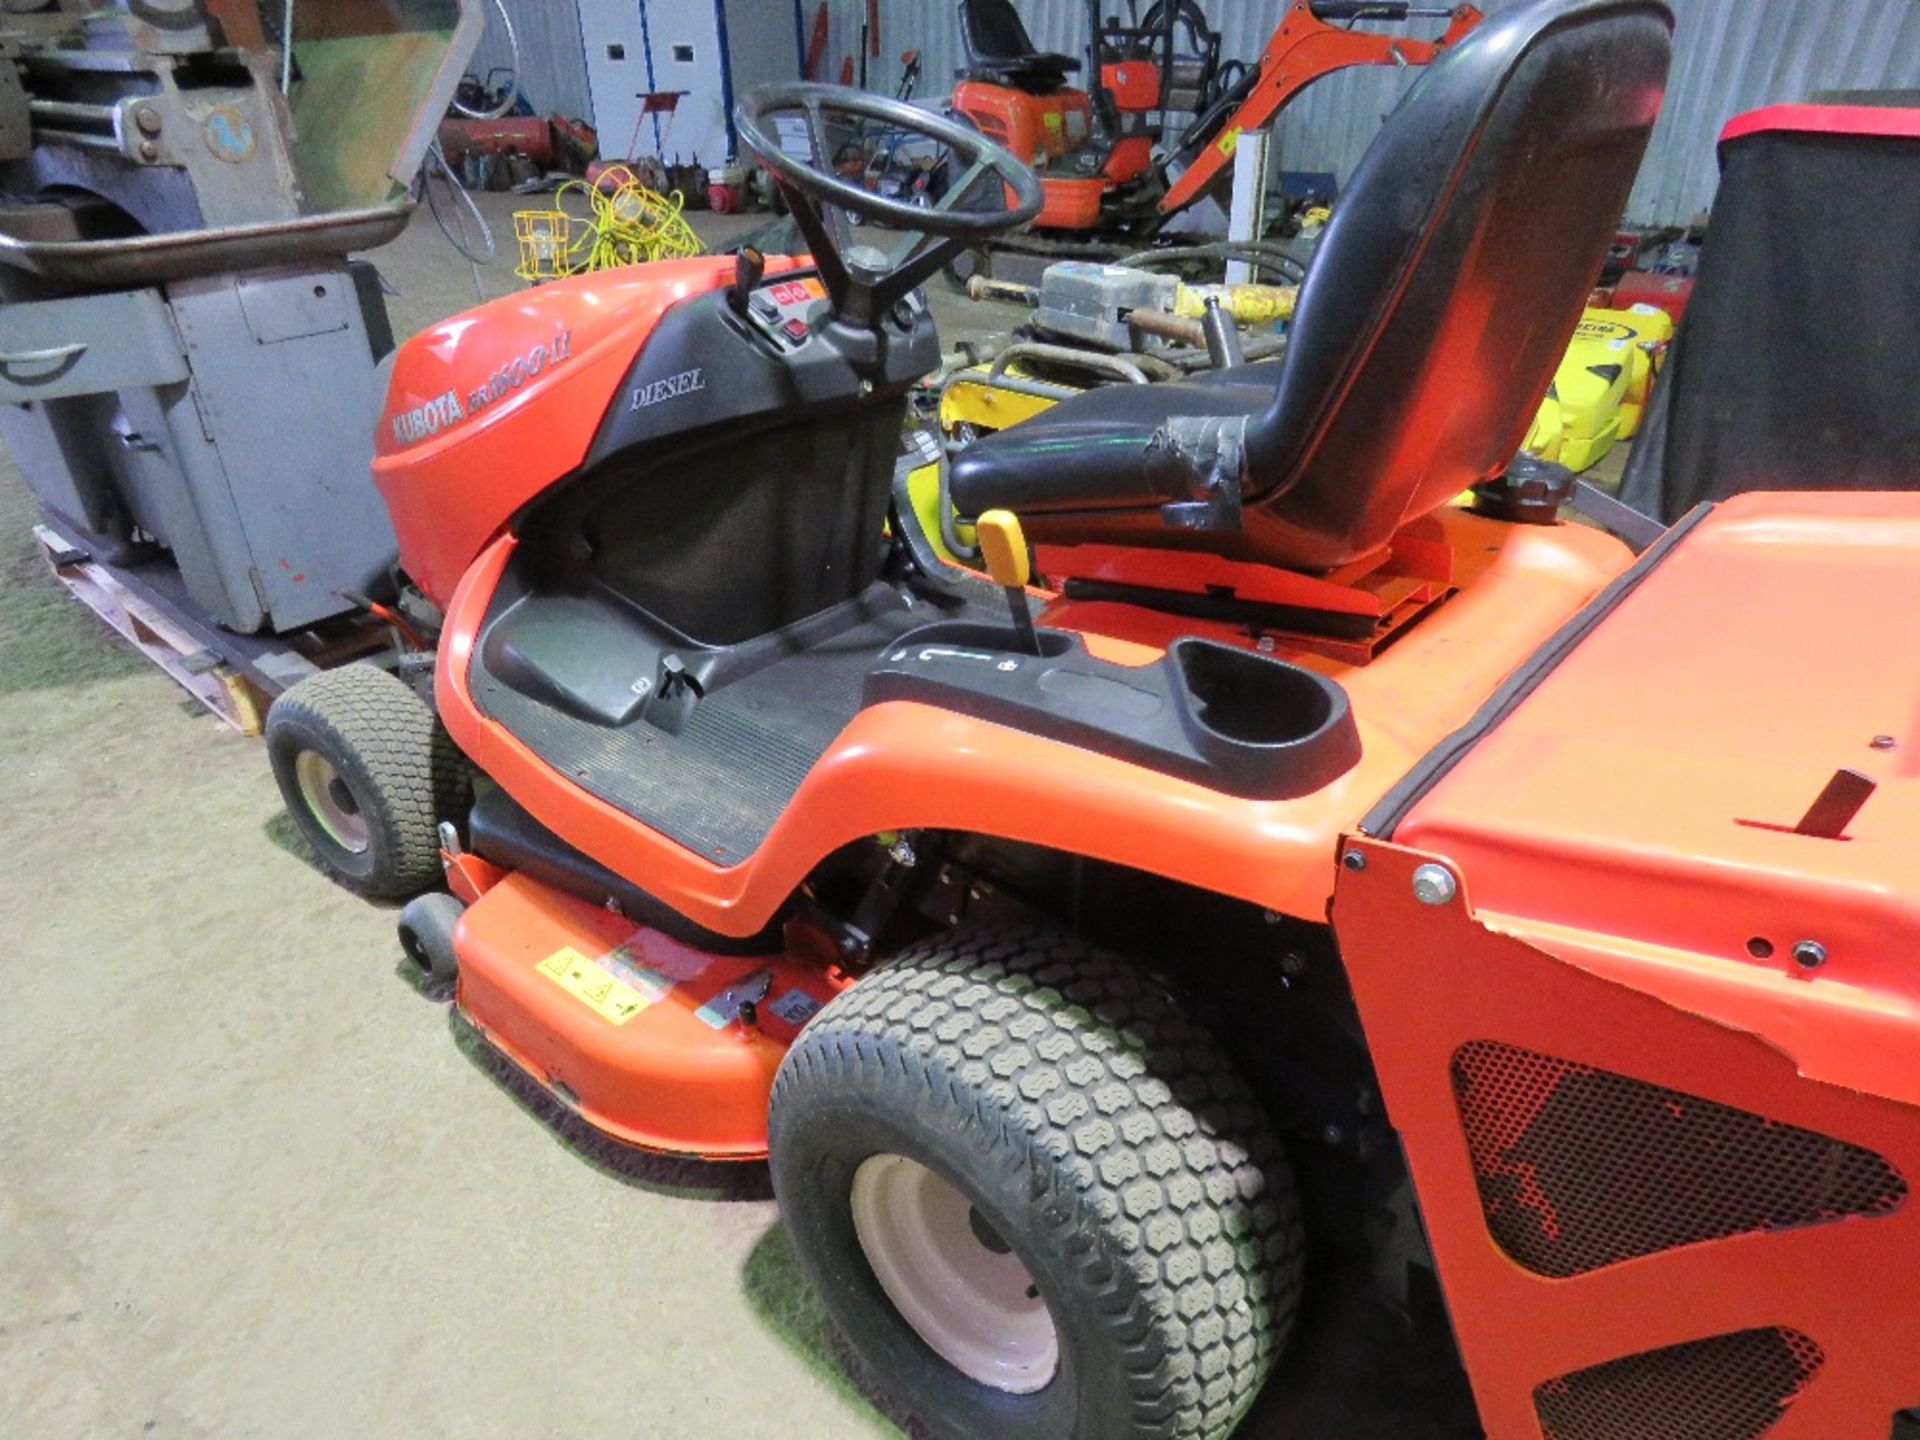 KUBOTA GR1600-II DIESEL RIDE ON MOWER WITH REAR COLLECTOR PLUS DISCHARGE CHUTE. SN:30142. WHEN TESTE - Image 6 of 14